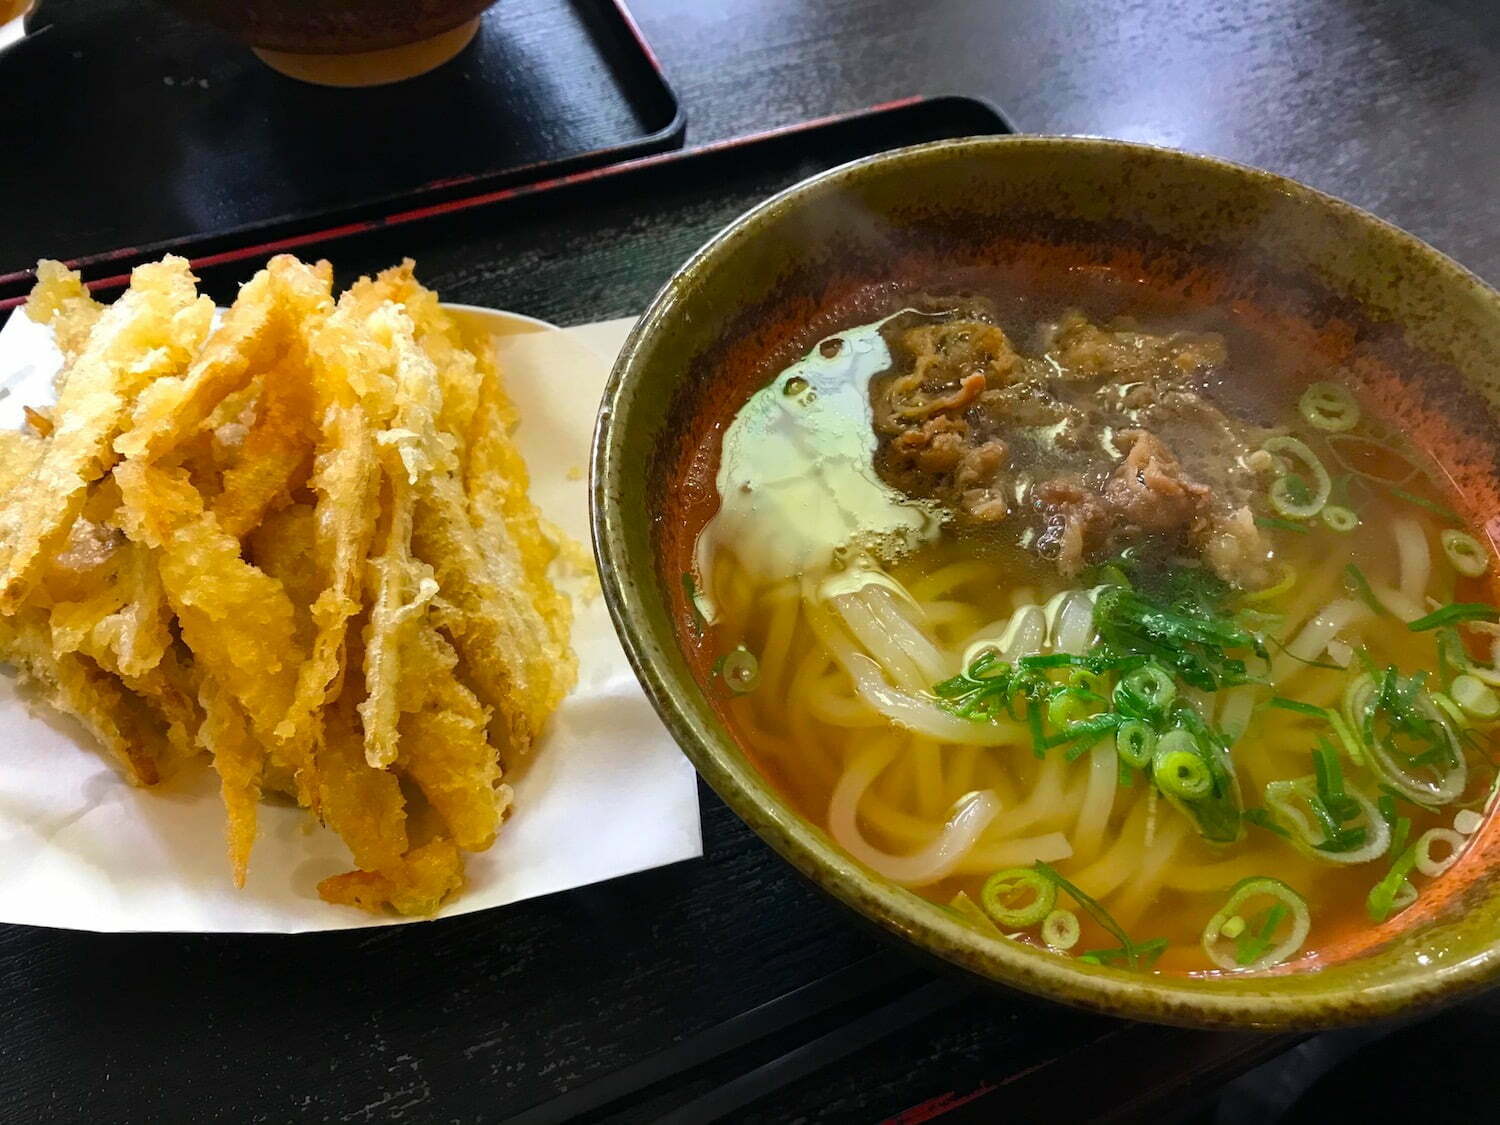 Niku & Gobou Udon, Udon noodle with beef and fried Burdock